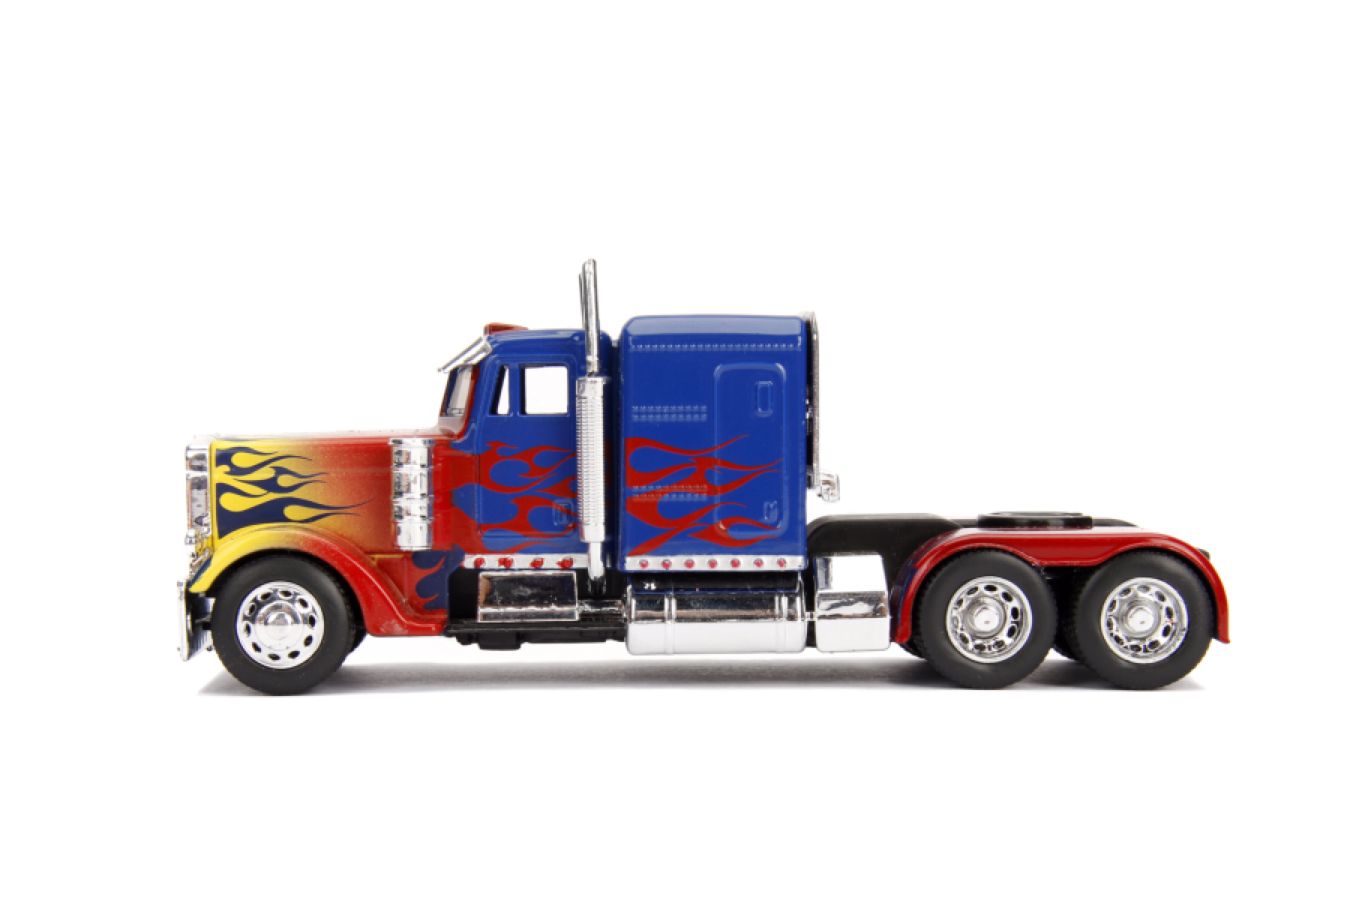 Transformers (2007) - Optimus Prime T1 1:32 Hollywood Ride